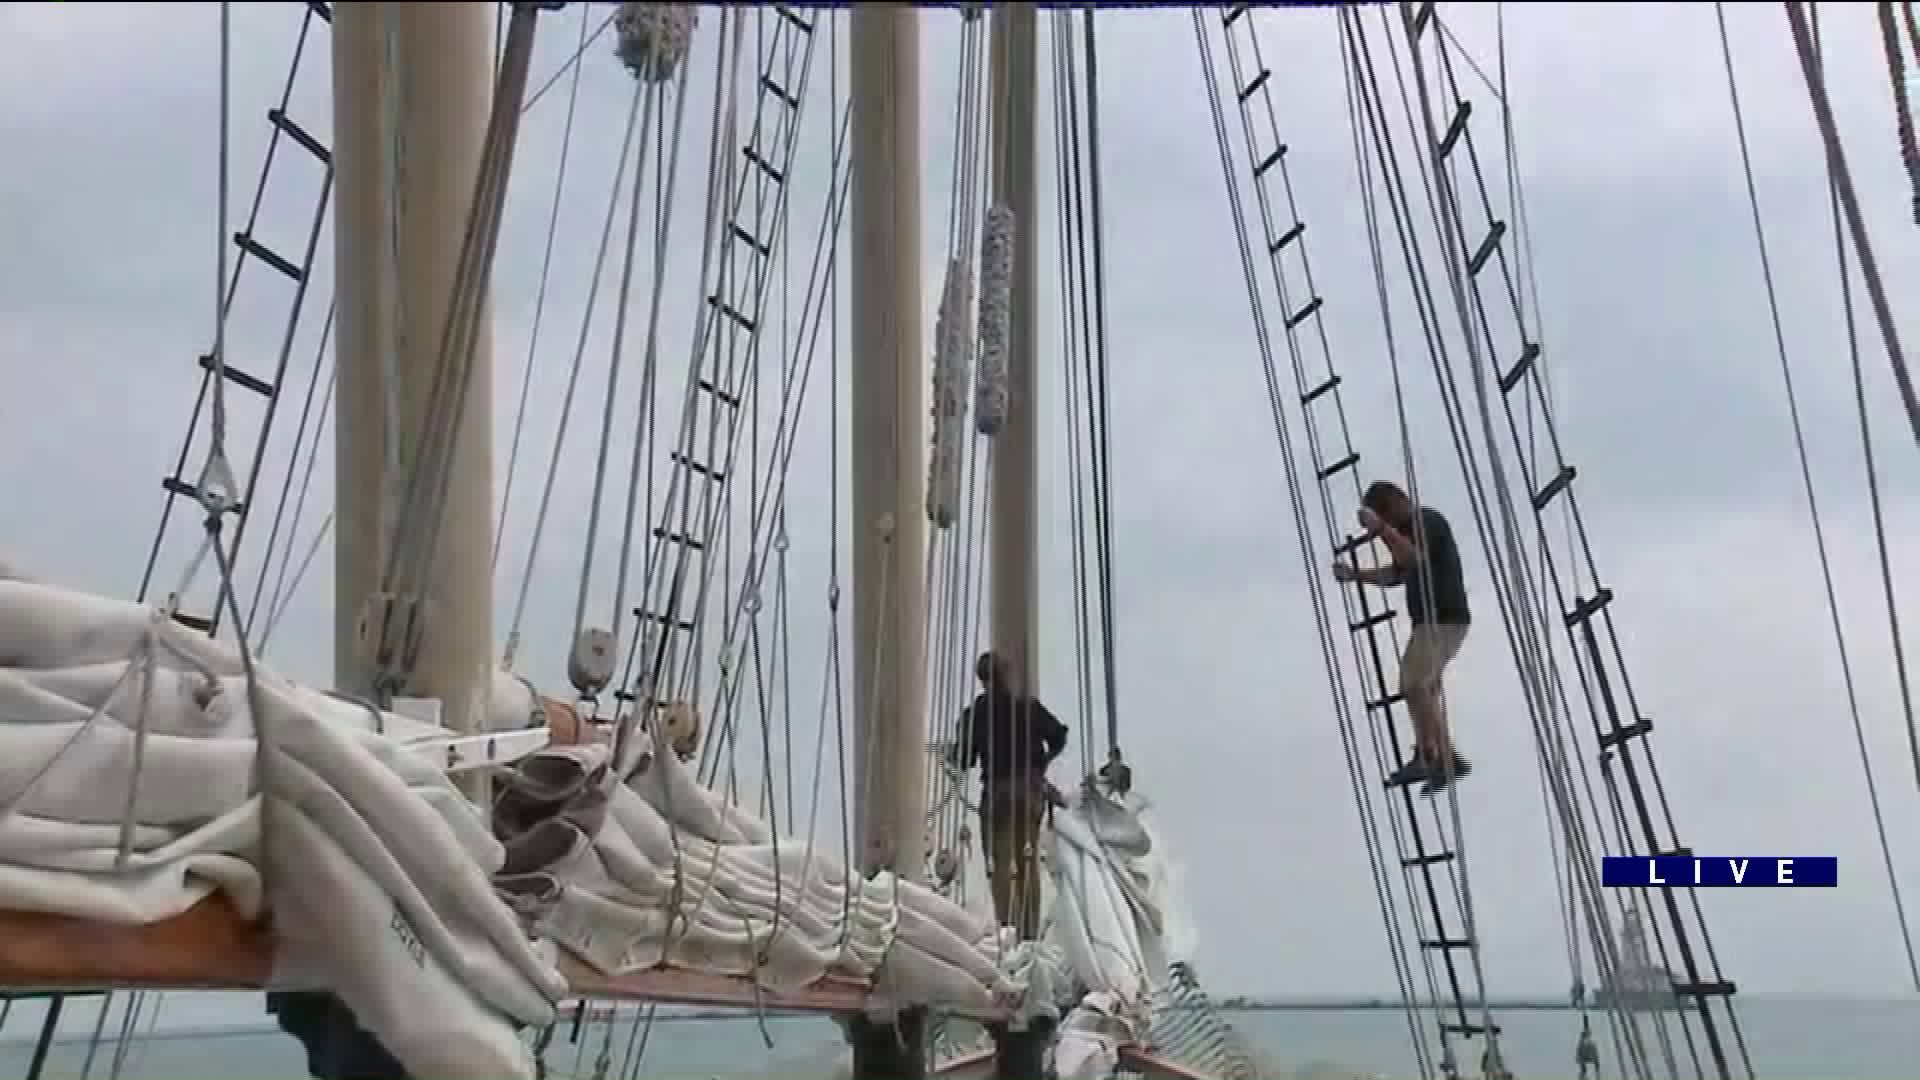 Around Town explores Tall Ship Windy